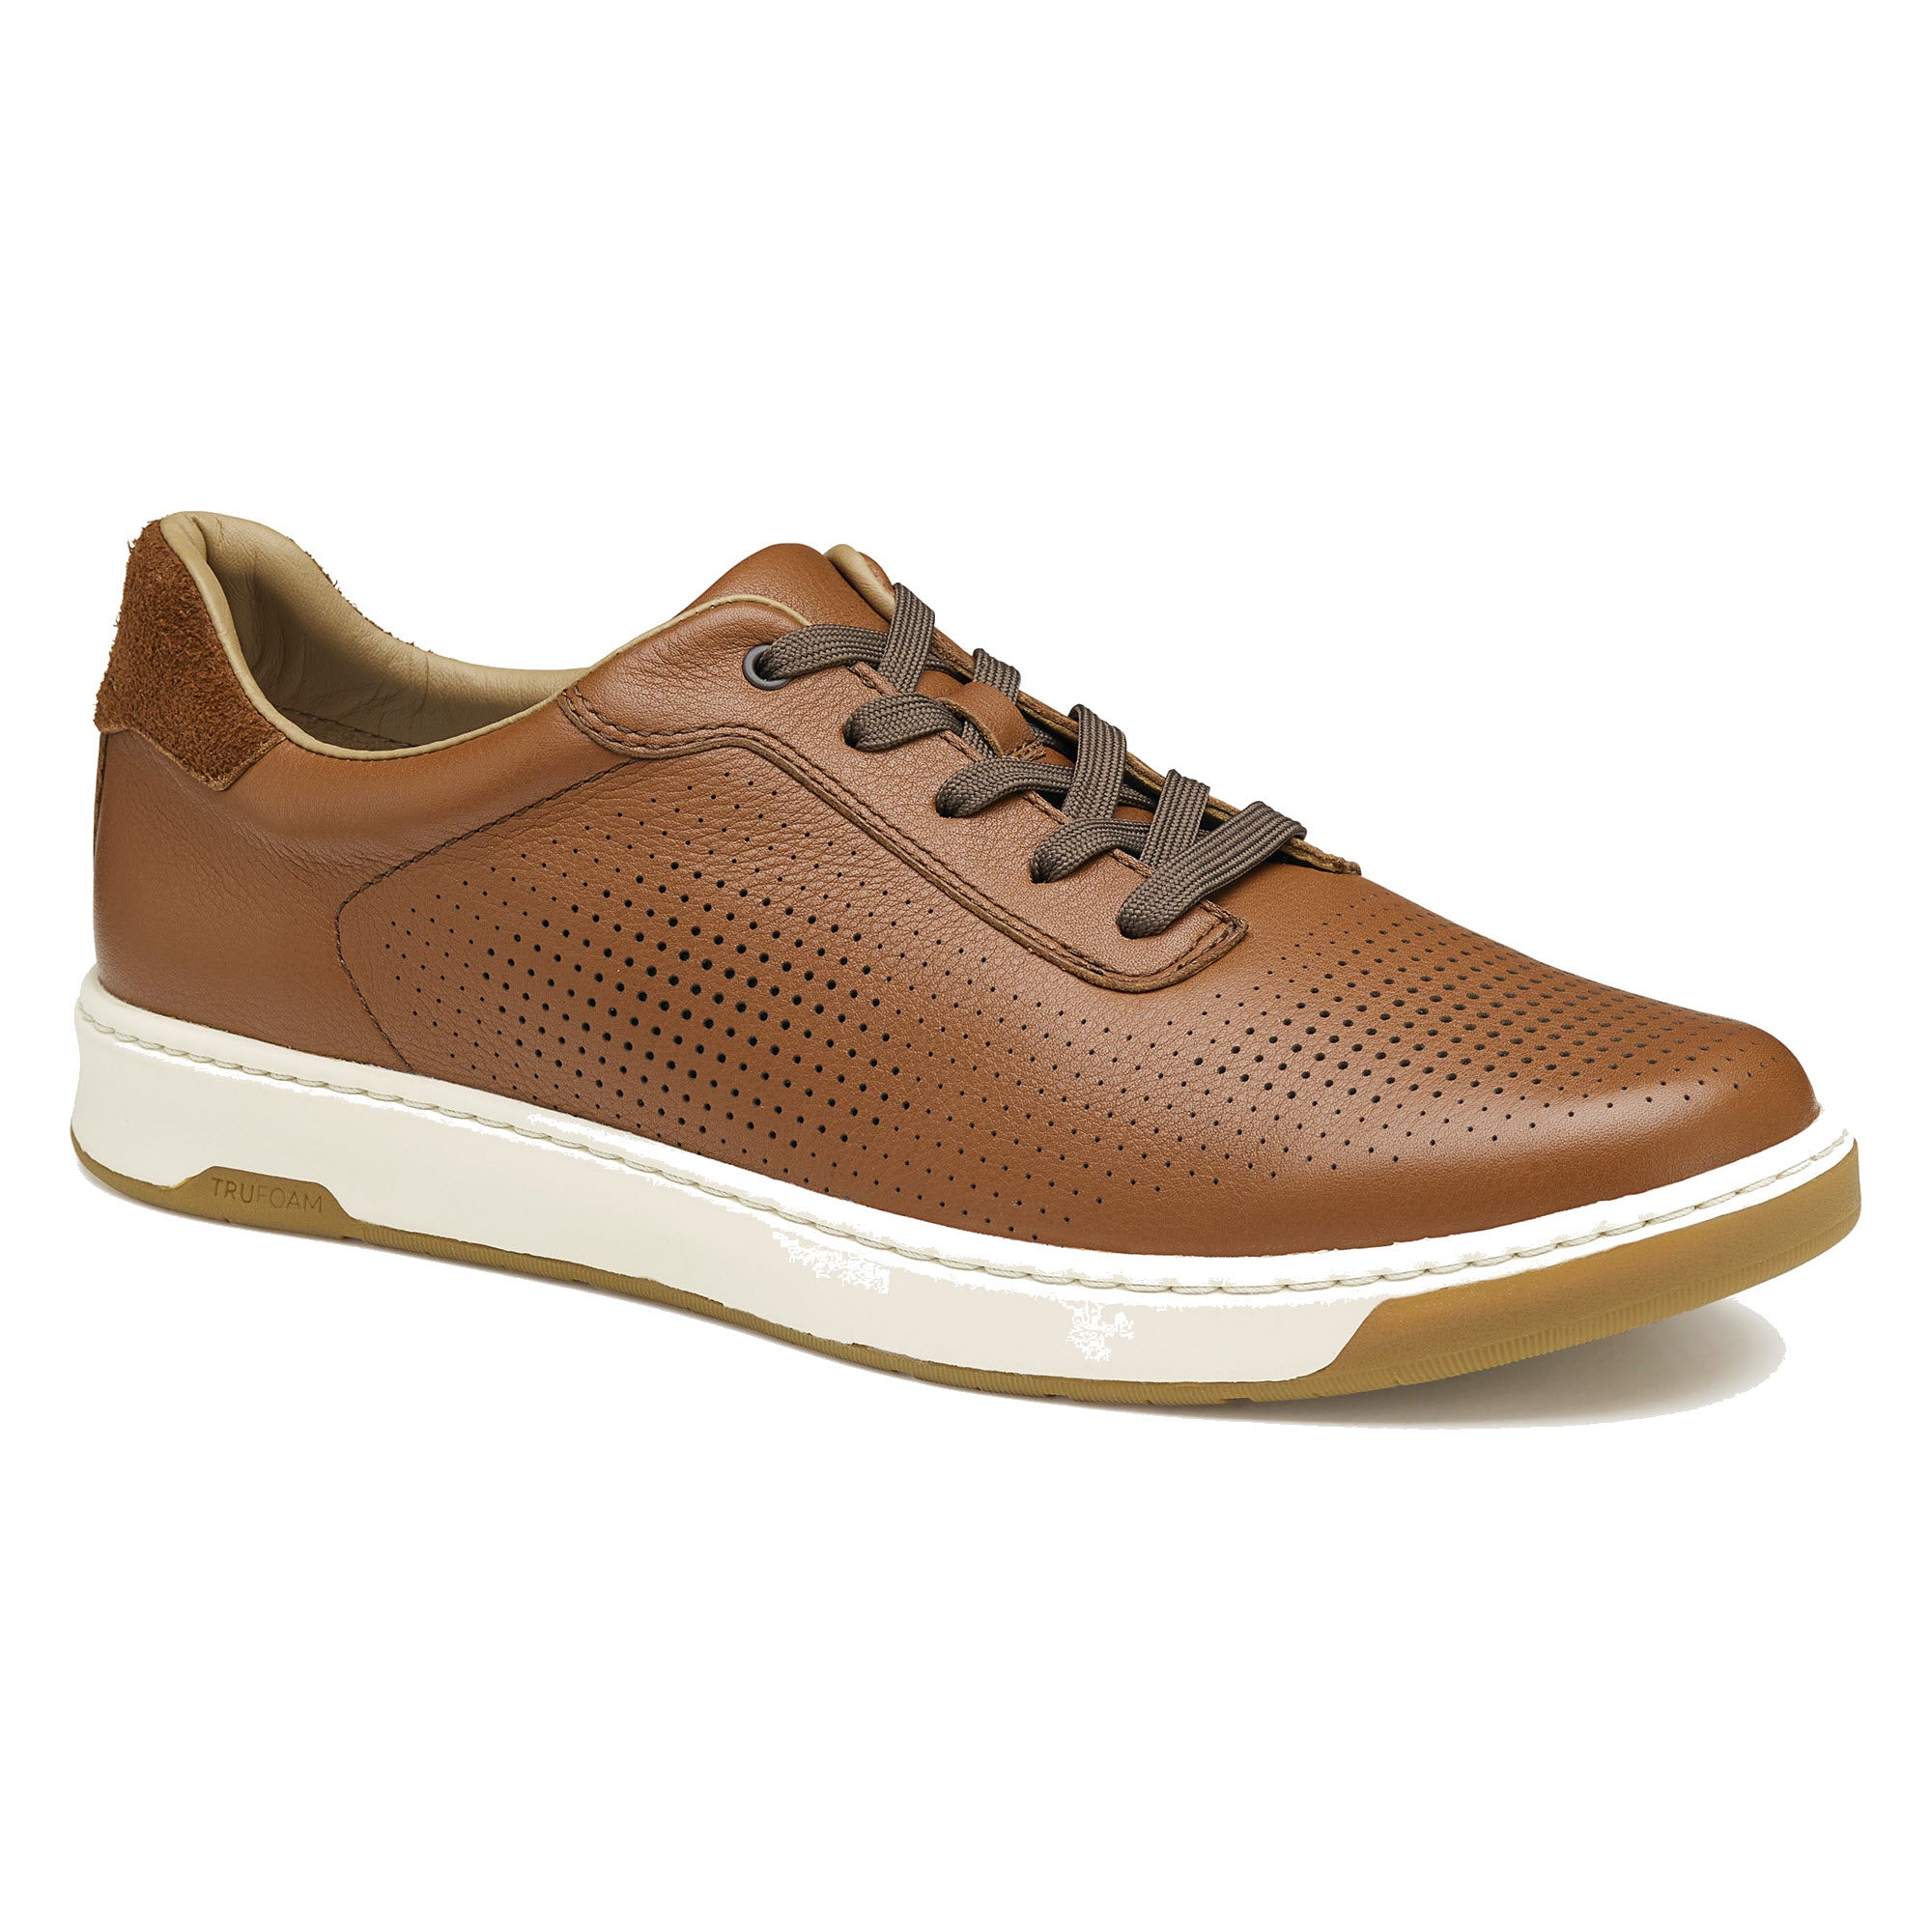 A brown Johnston & Murphy Daxton U-Throat tan casual full-grain leather sneaker with perforations and a white sole.